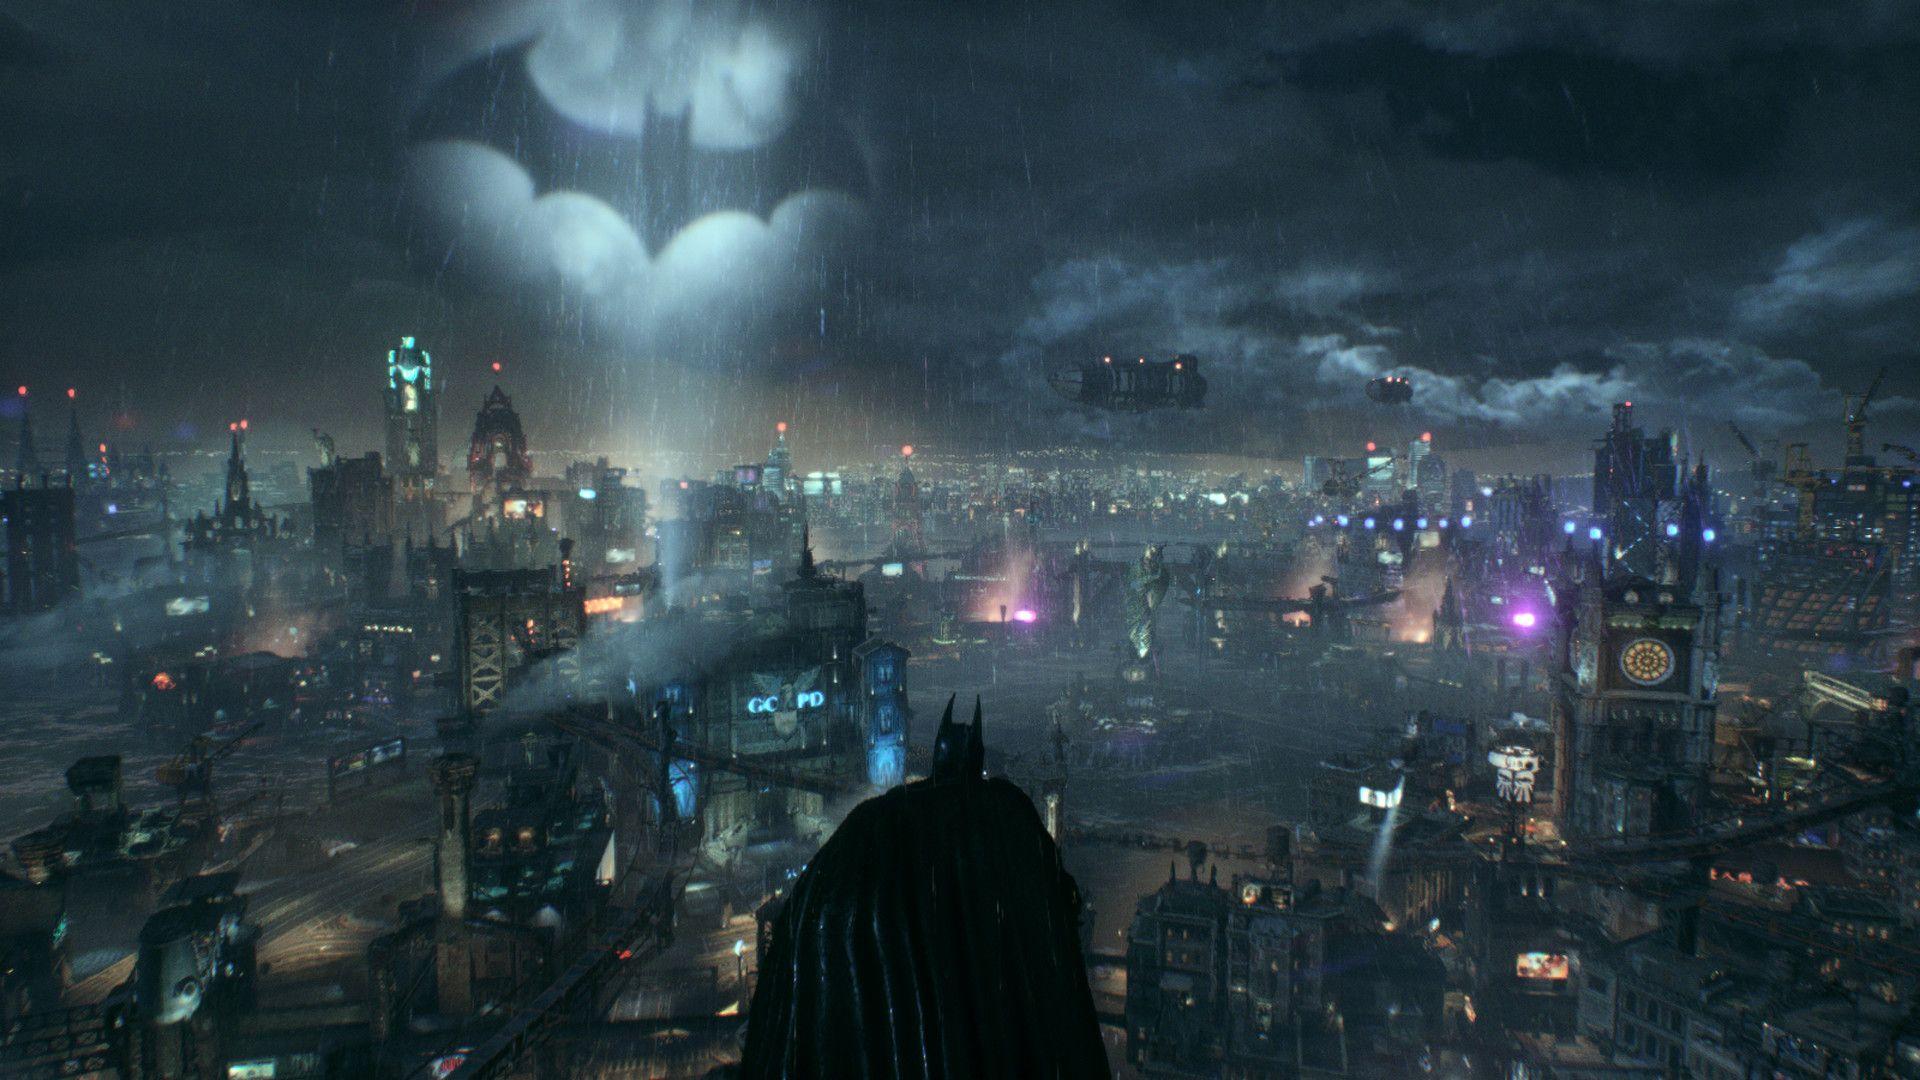 Can You Name These Fictonal Cities From Movies?